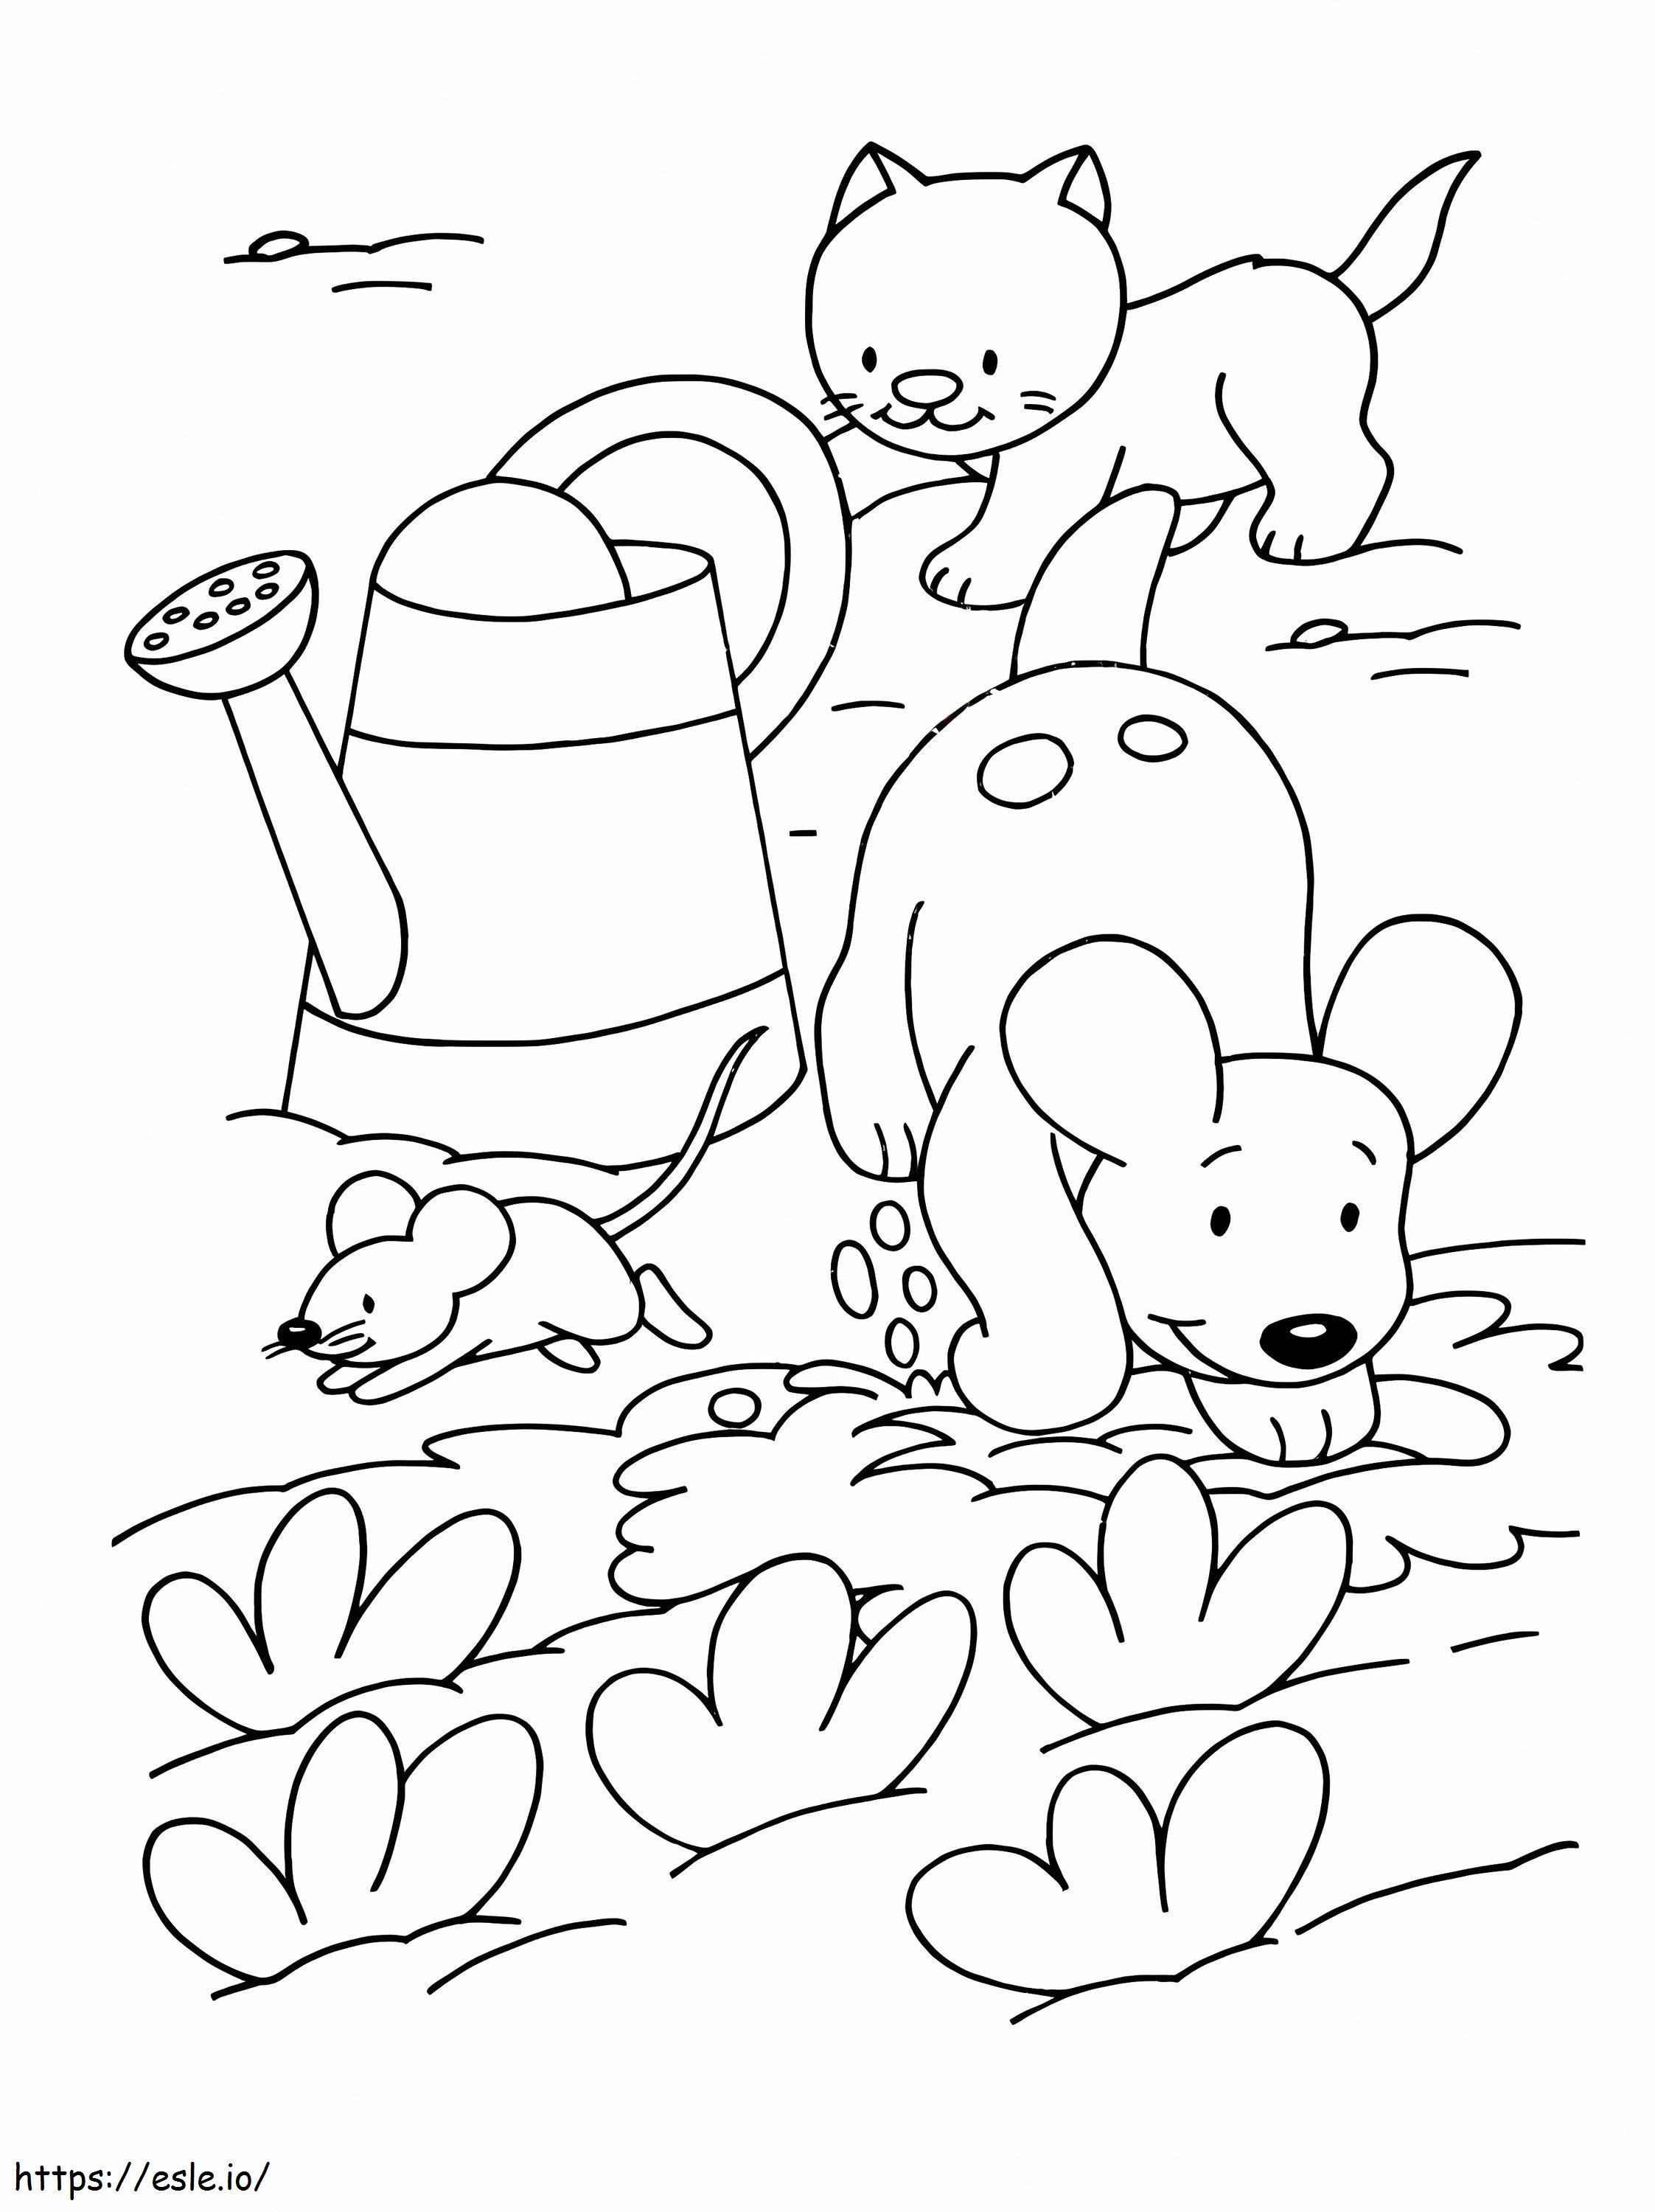 Pets In The Garden coloring page